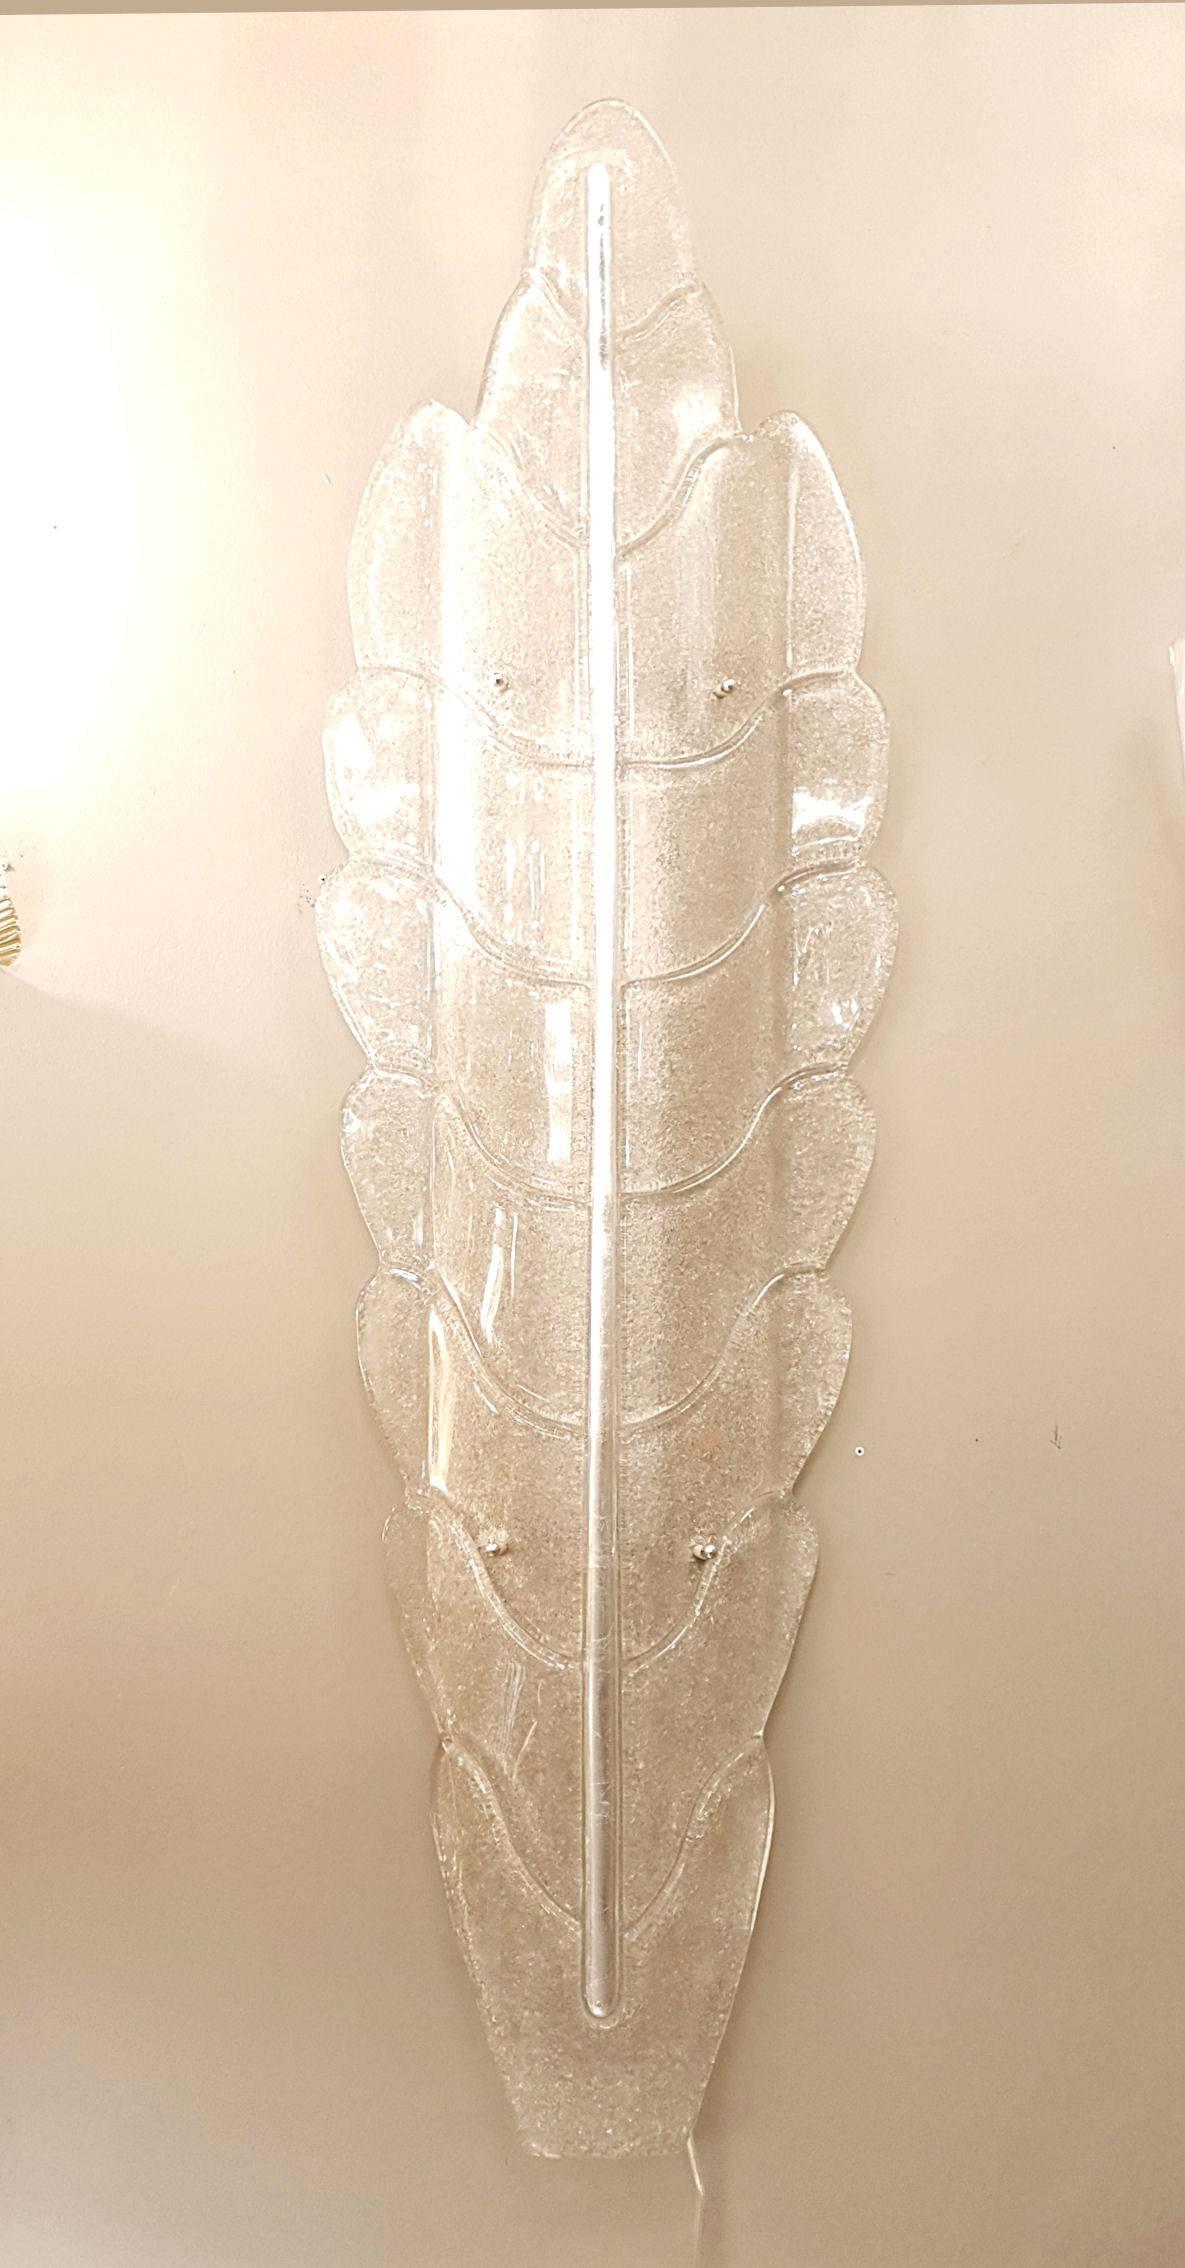 Extra large sculptural Mid-Century Modern light beige, with silver/gold flakes leaf shaped Murano glass sconces. In the style of Barovier e Toso Mid-Century Modern Murano glass creations.
Four candelabra base lights each, rewired.
One single Leaf